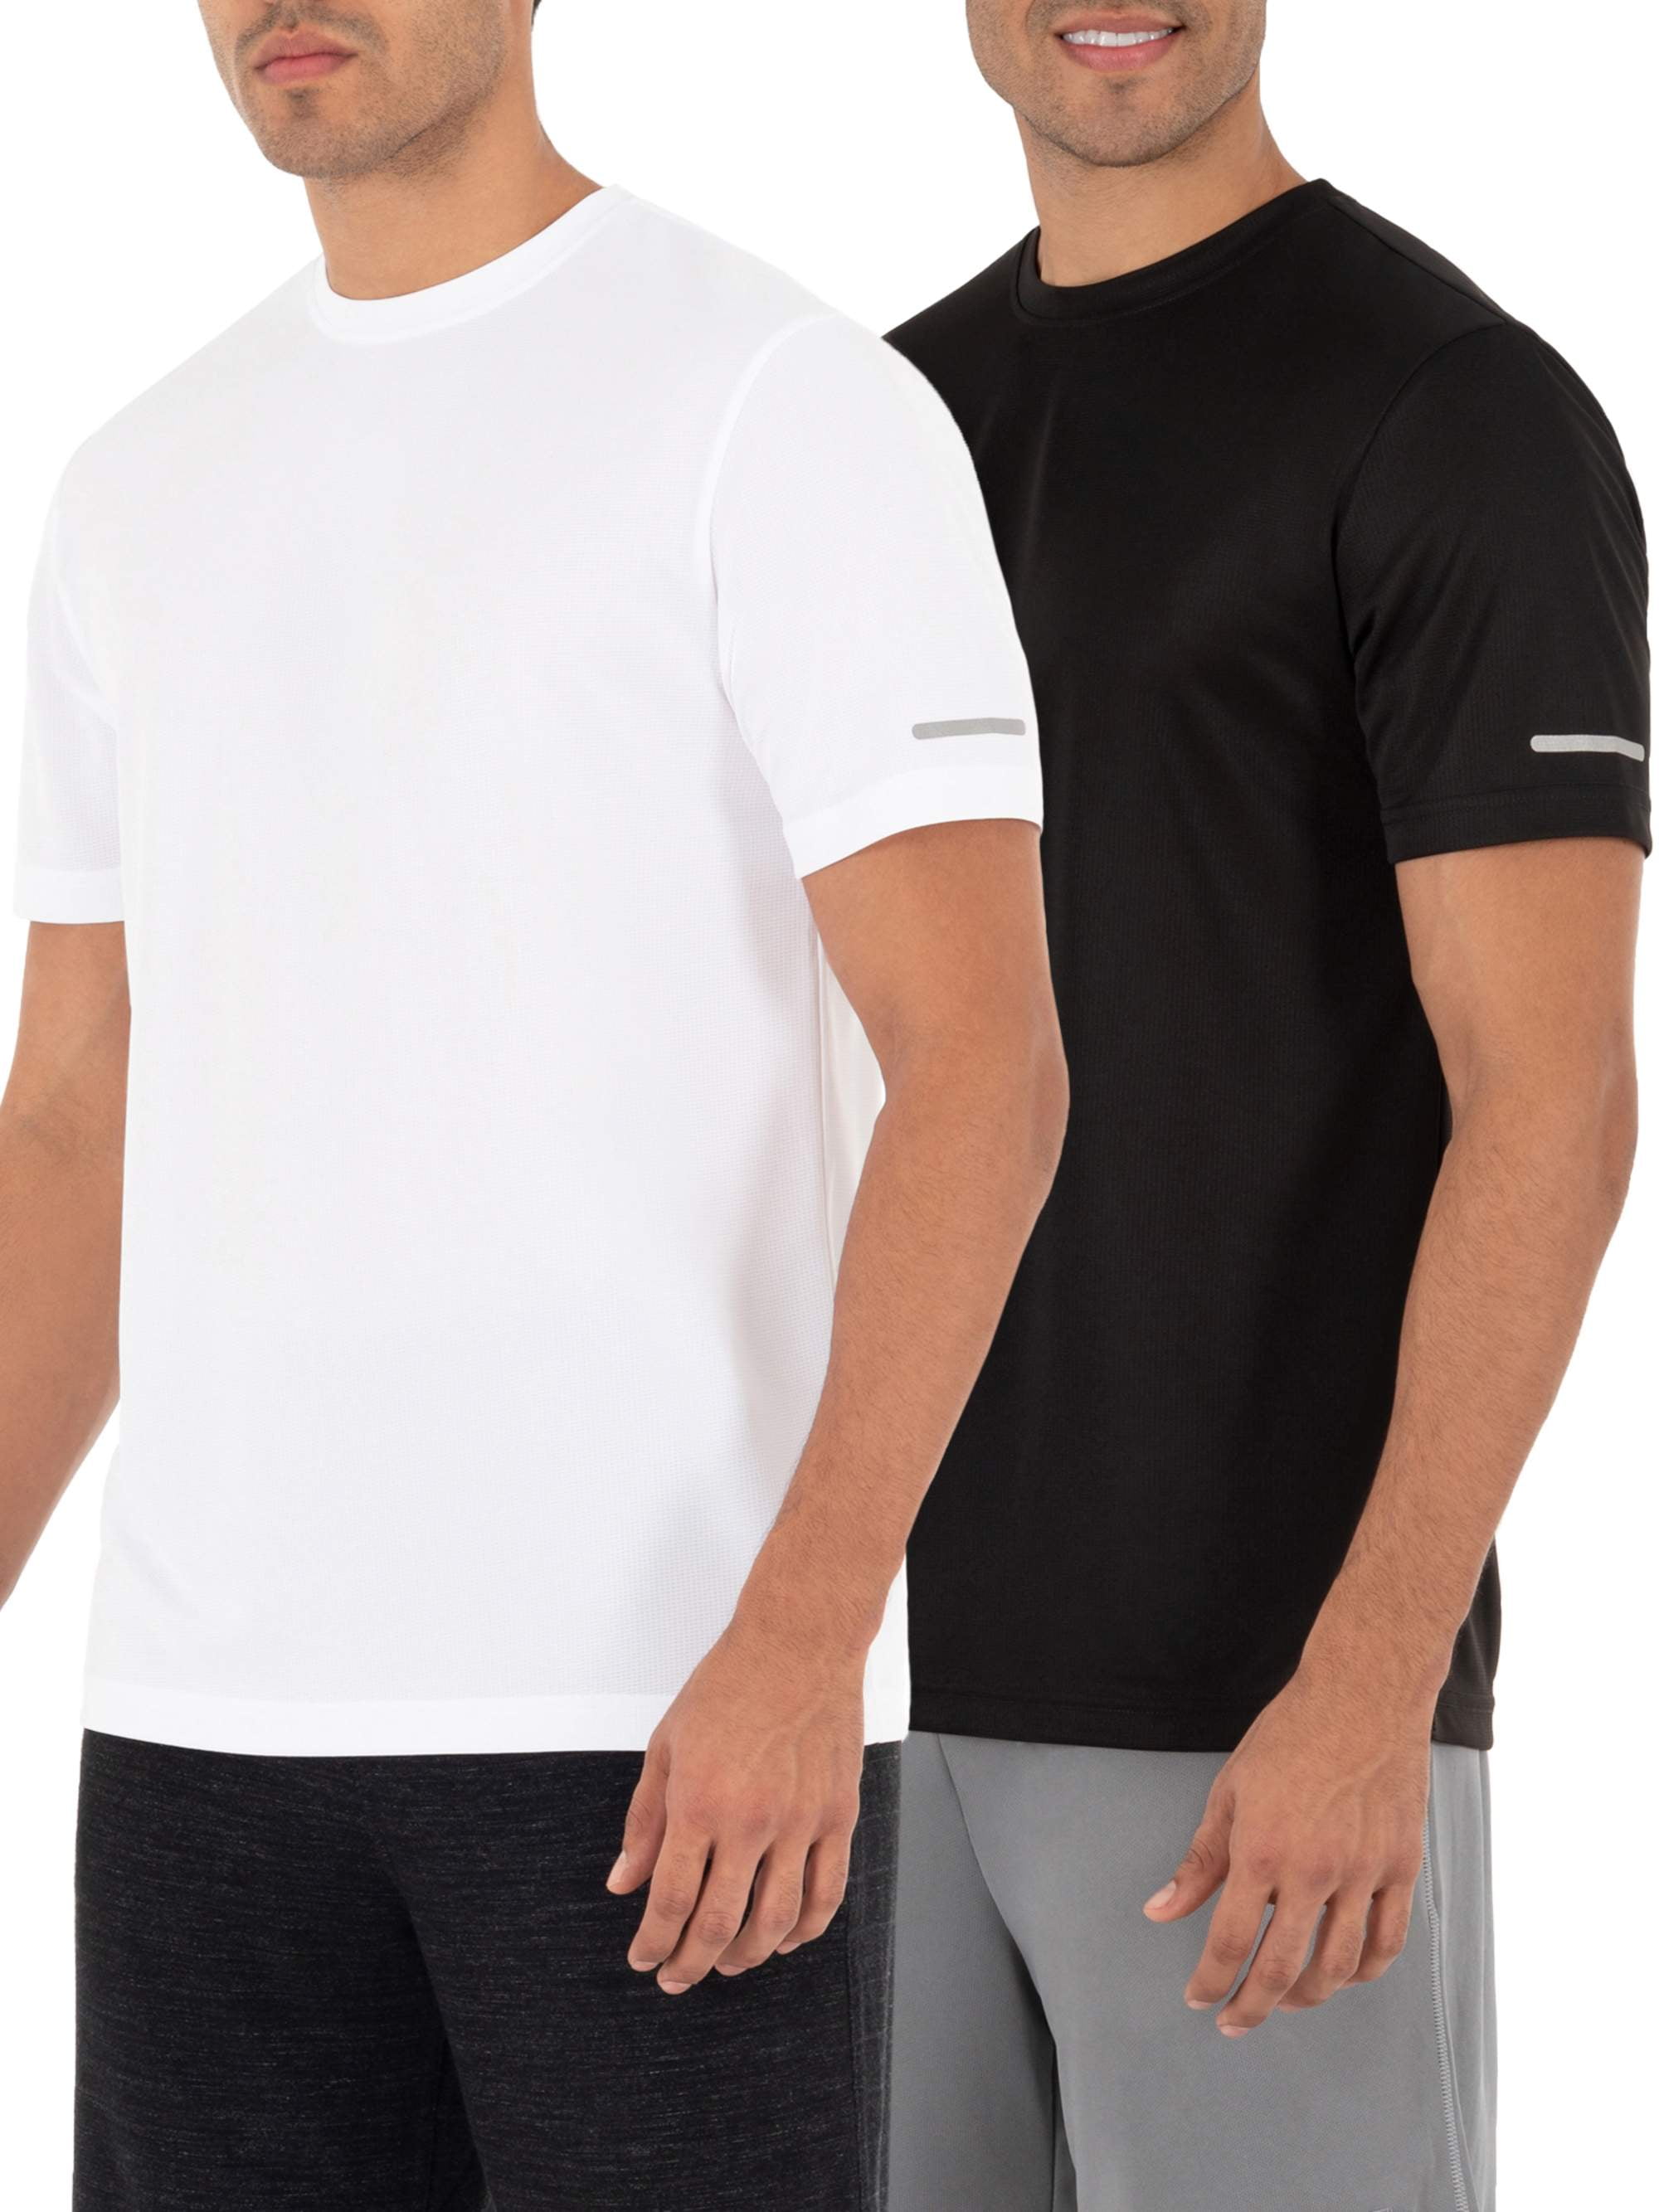 athletic works men's shirts